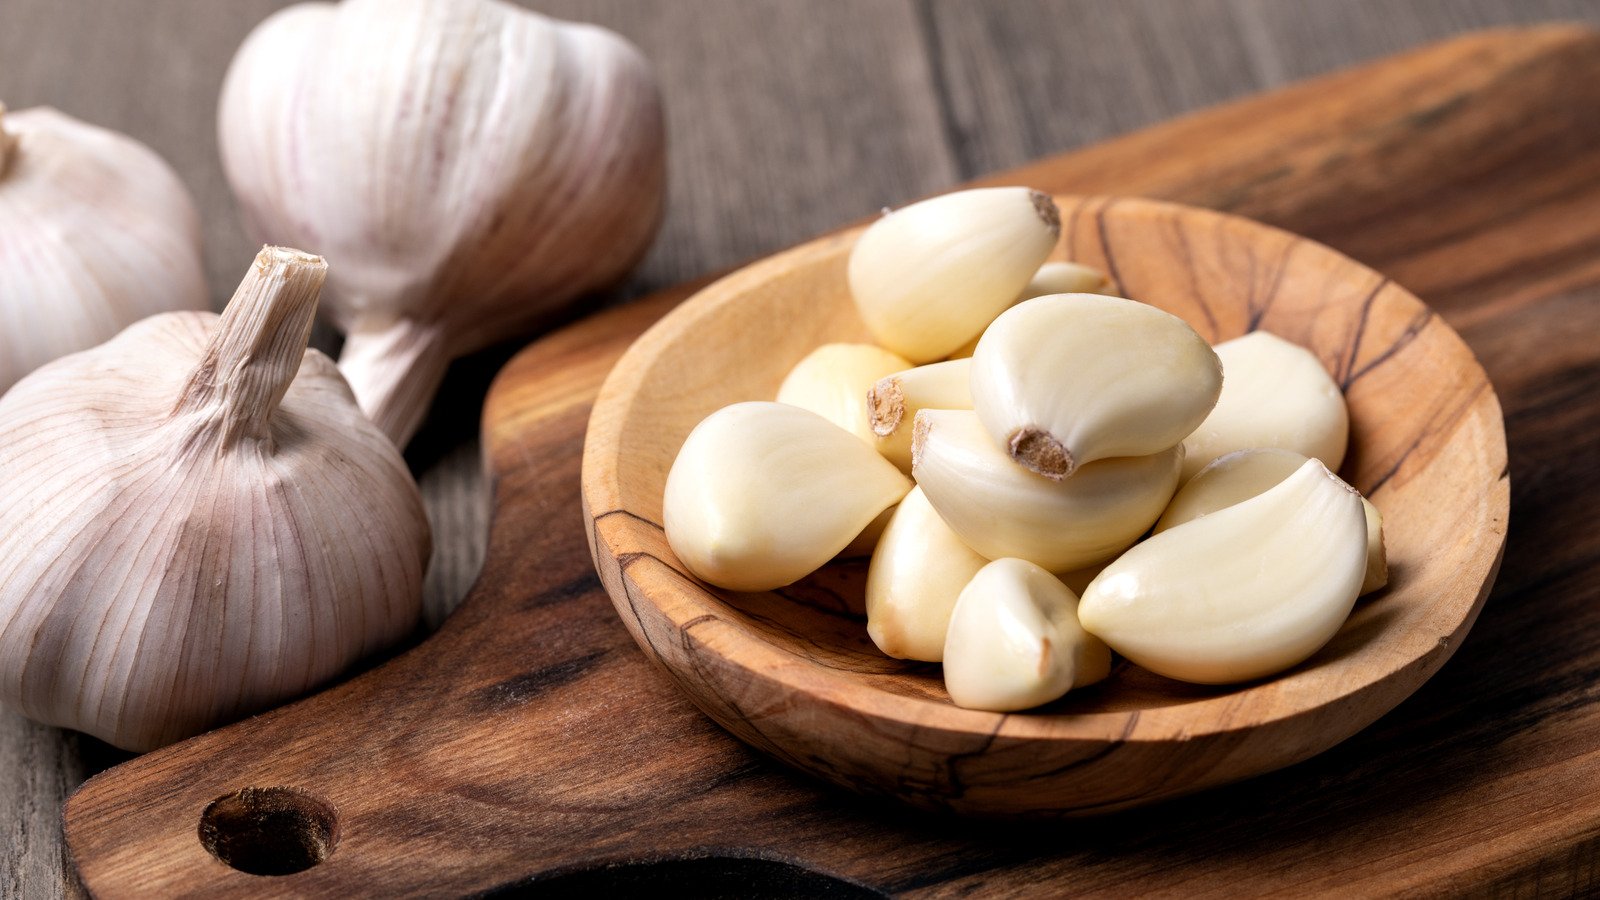 What Is A Garlic Clove Really And How Do You Use It?